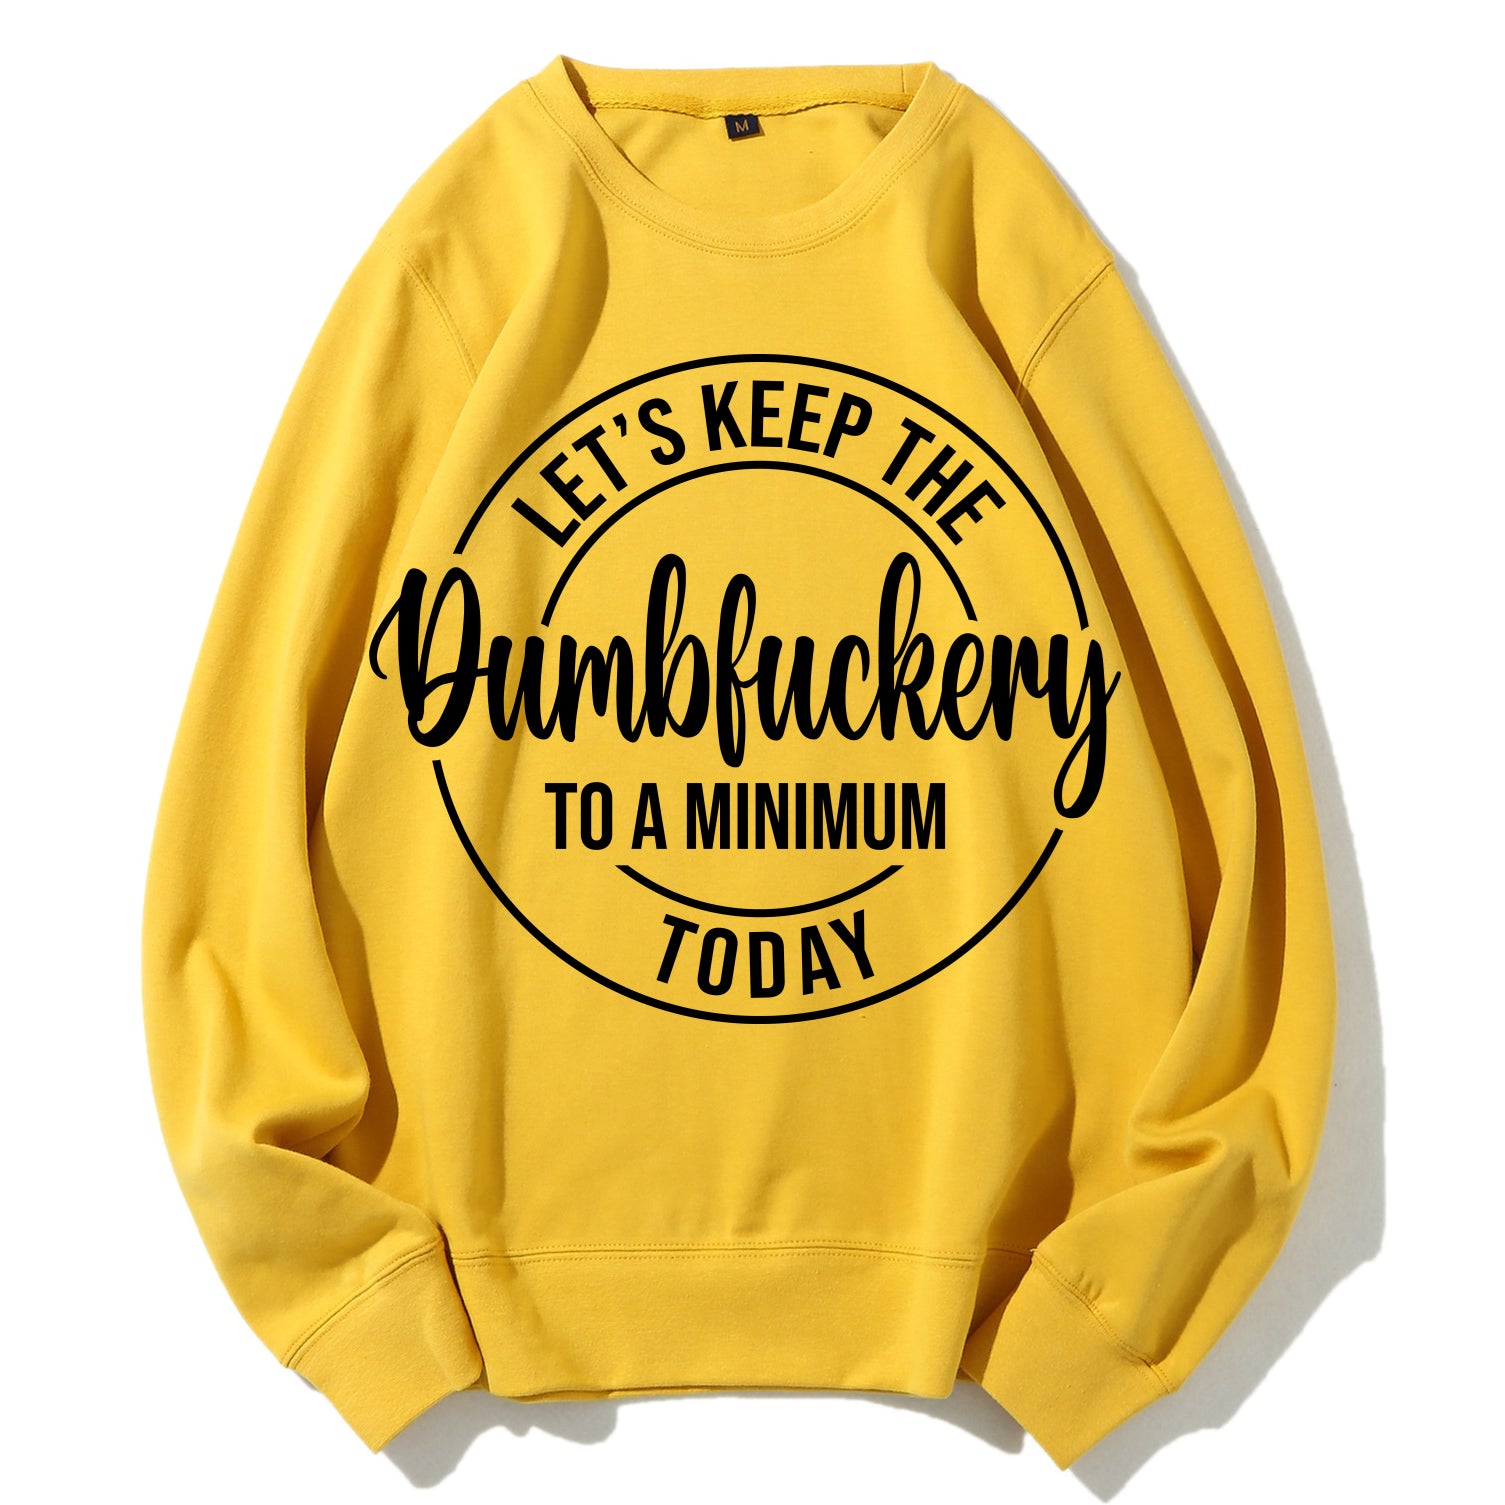 Let's Keep The Dumbfuckery To A Minimum Today Sweatshirt